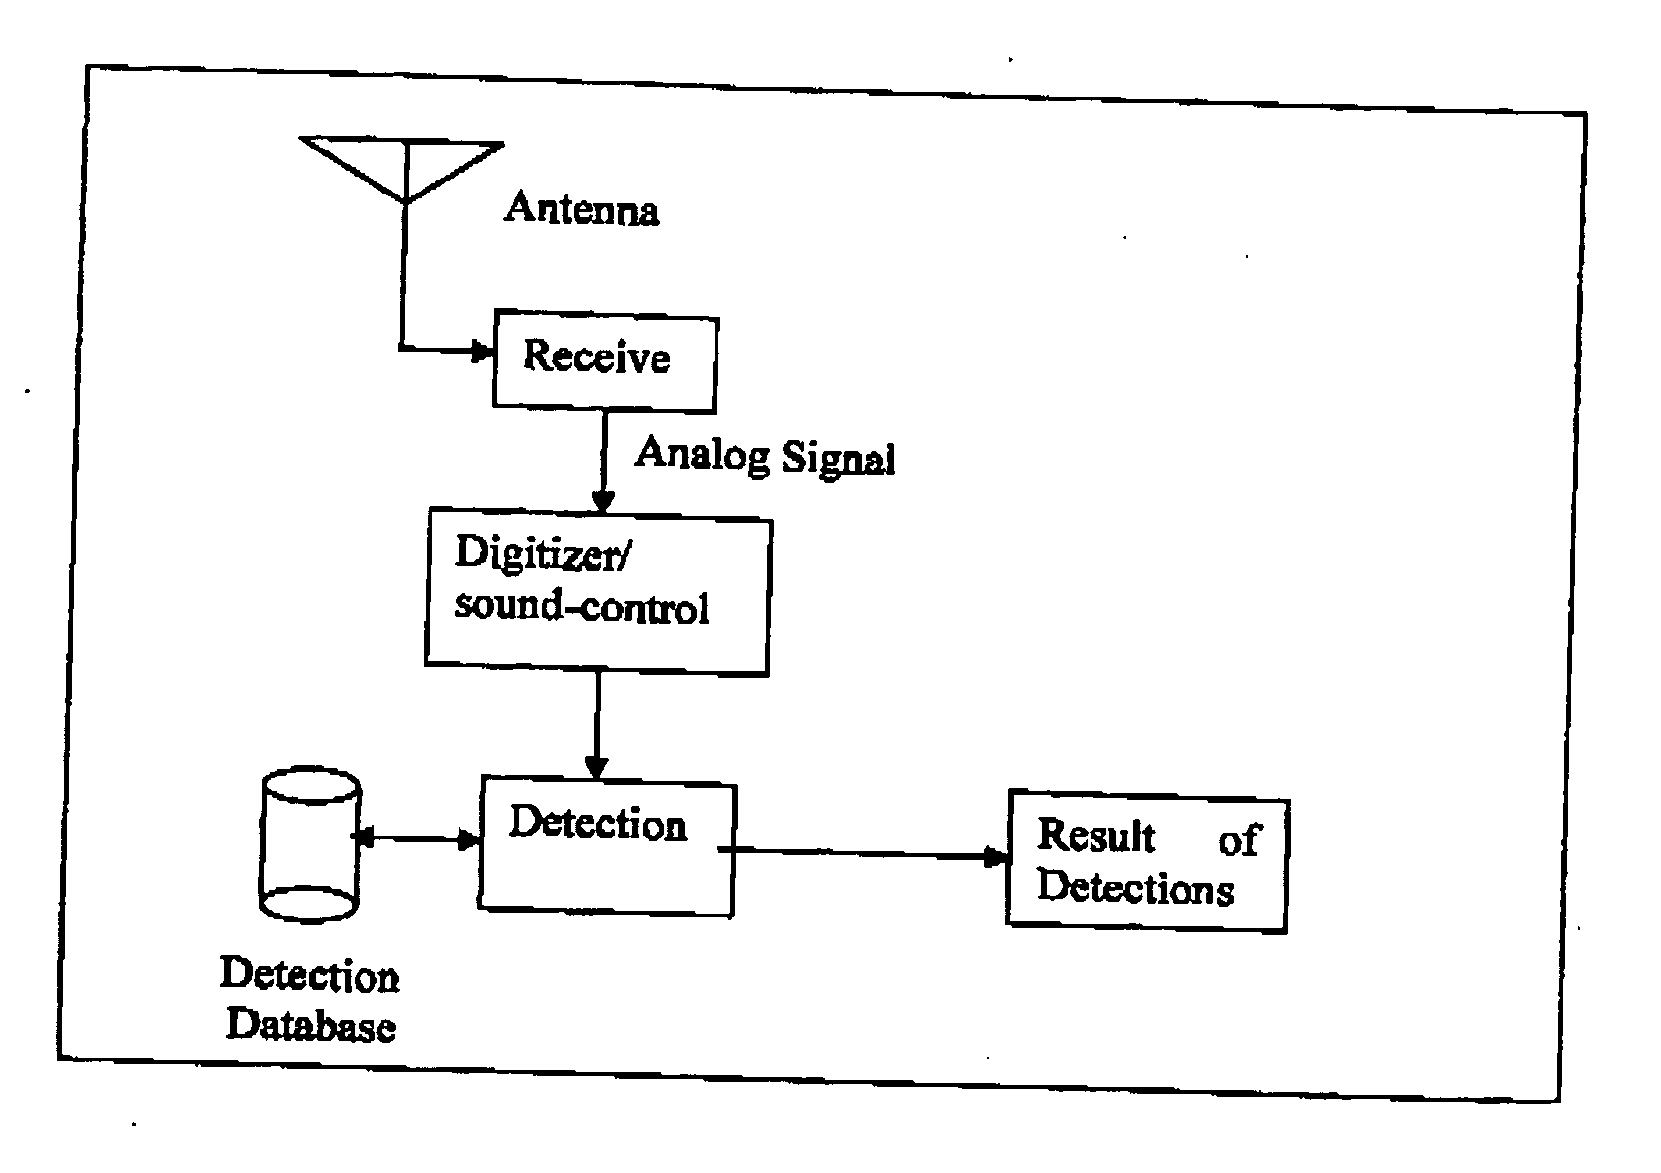 Method and apparatus for automatic detection and identification of unidentified broadcast audio or video signals